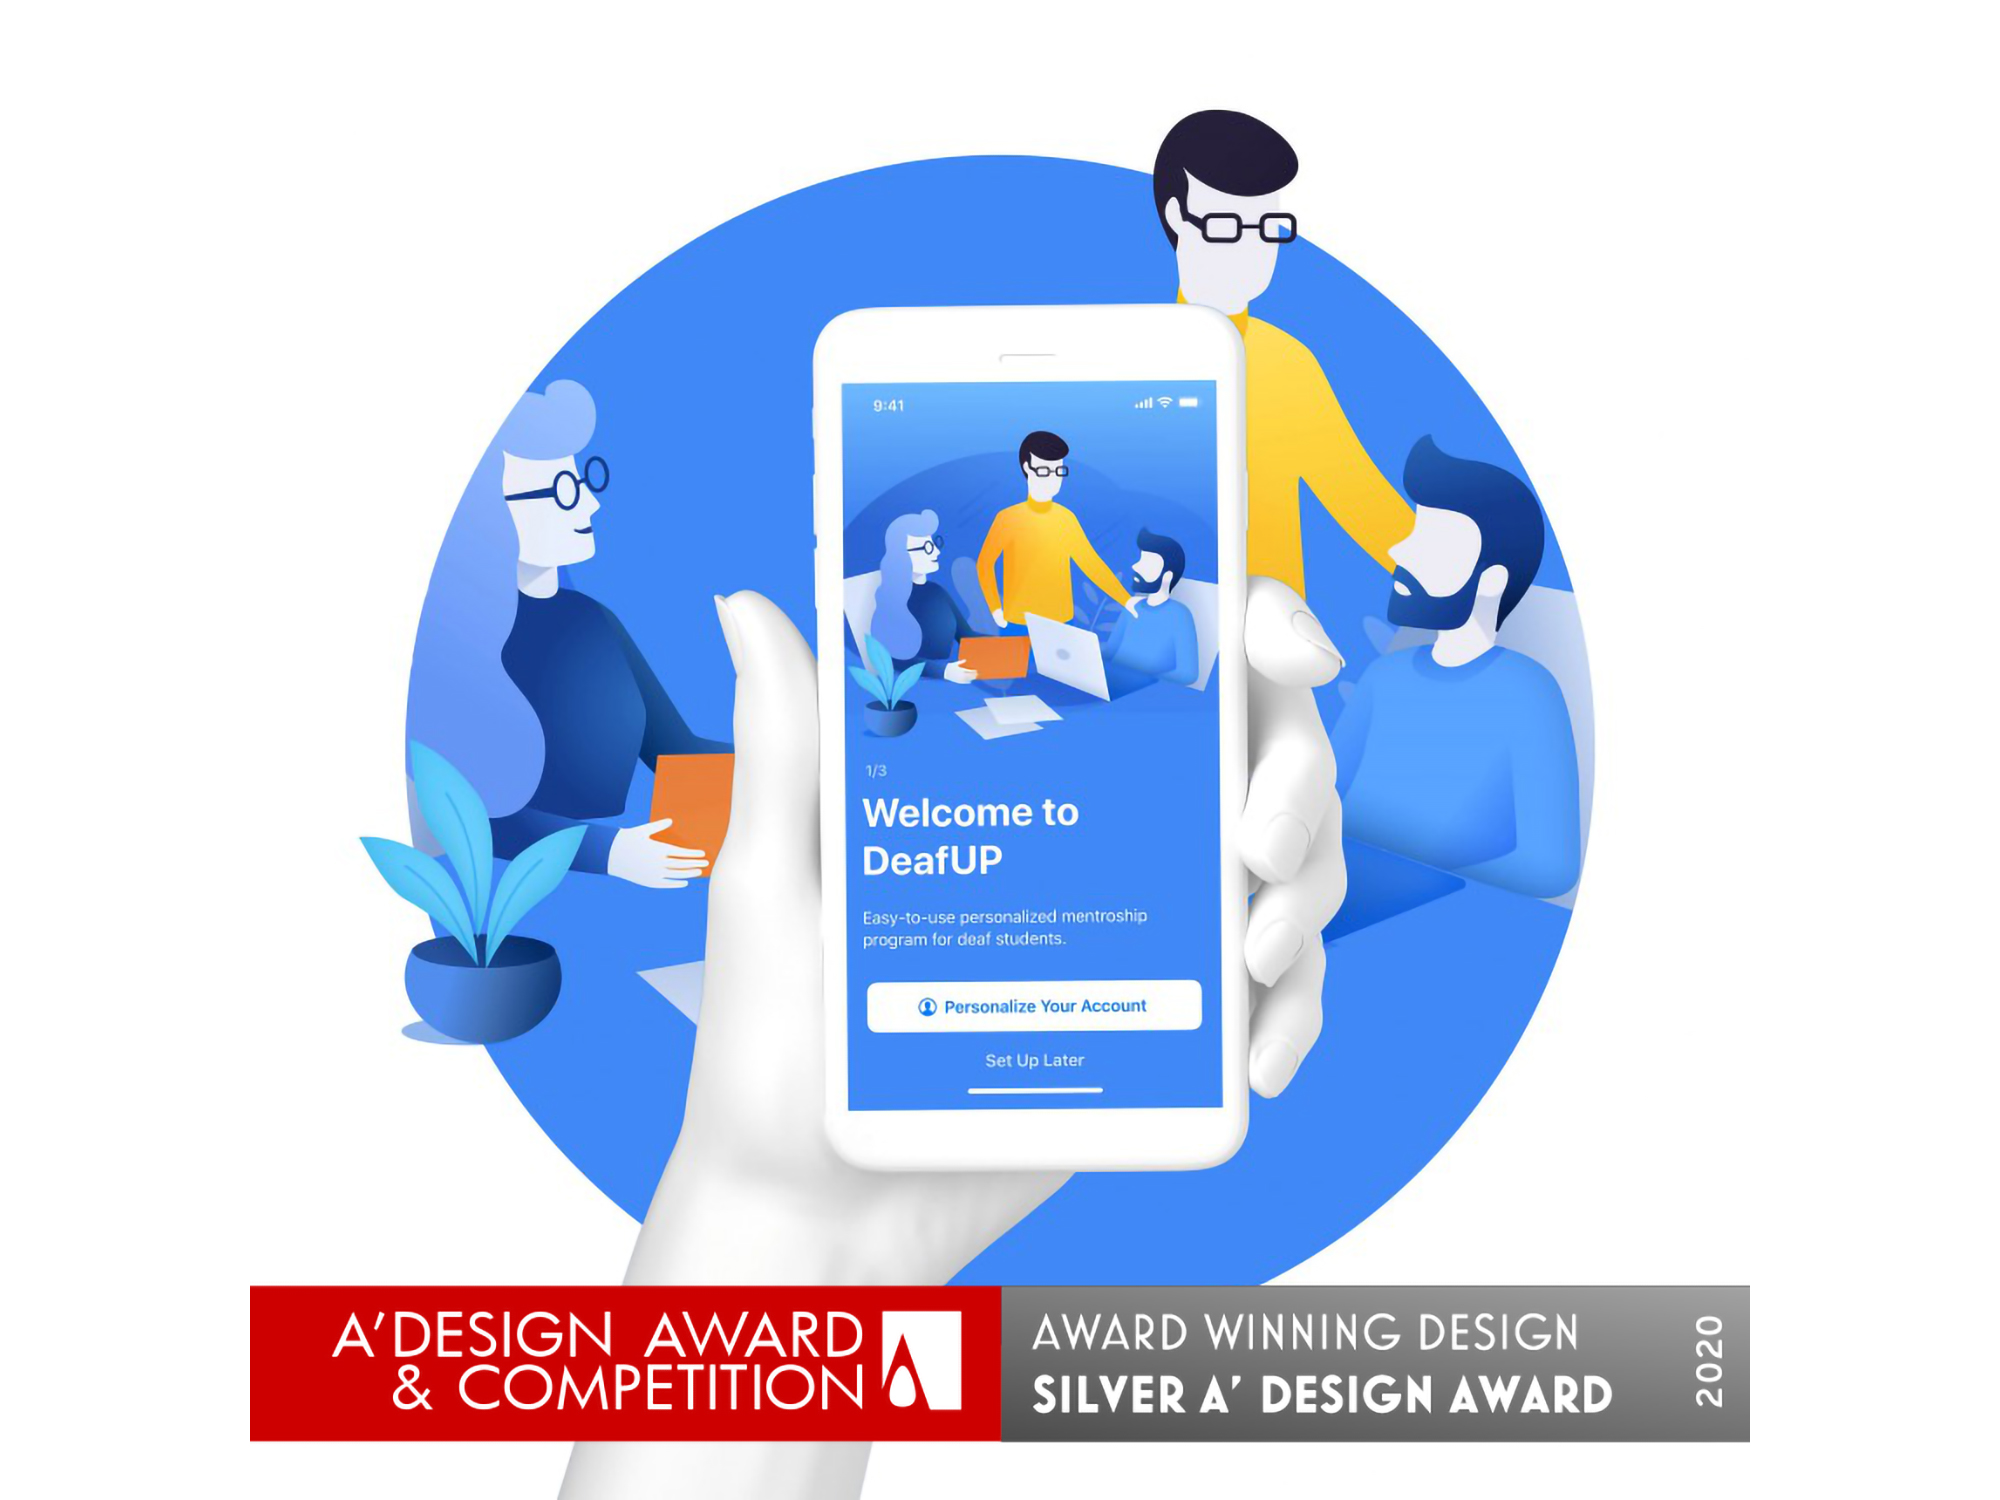 Brandly Collective wins A’Design Award for the DeafUP application